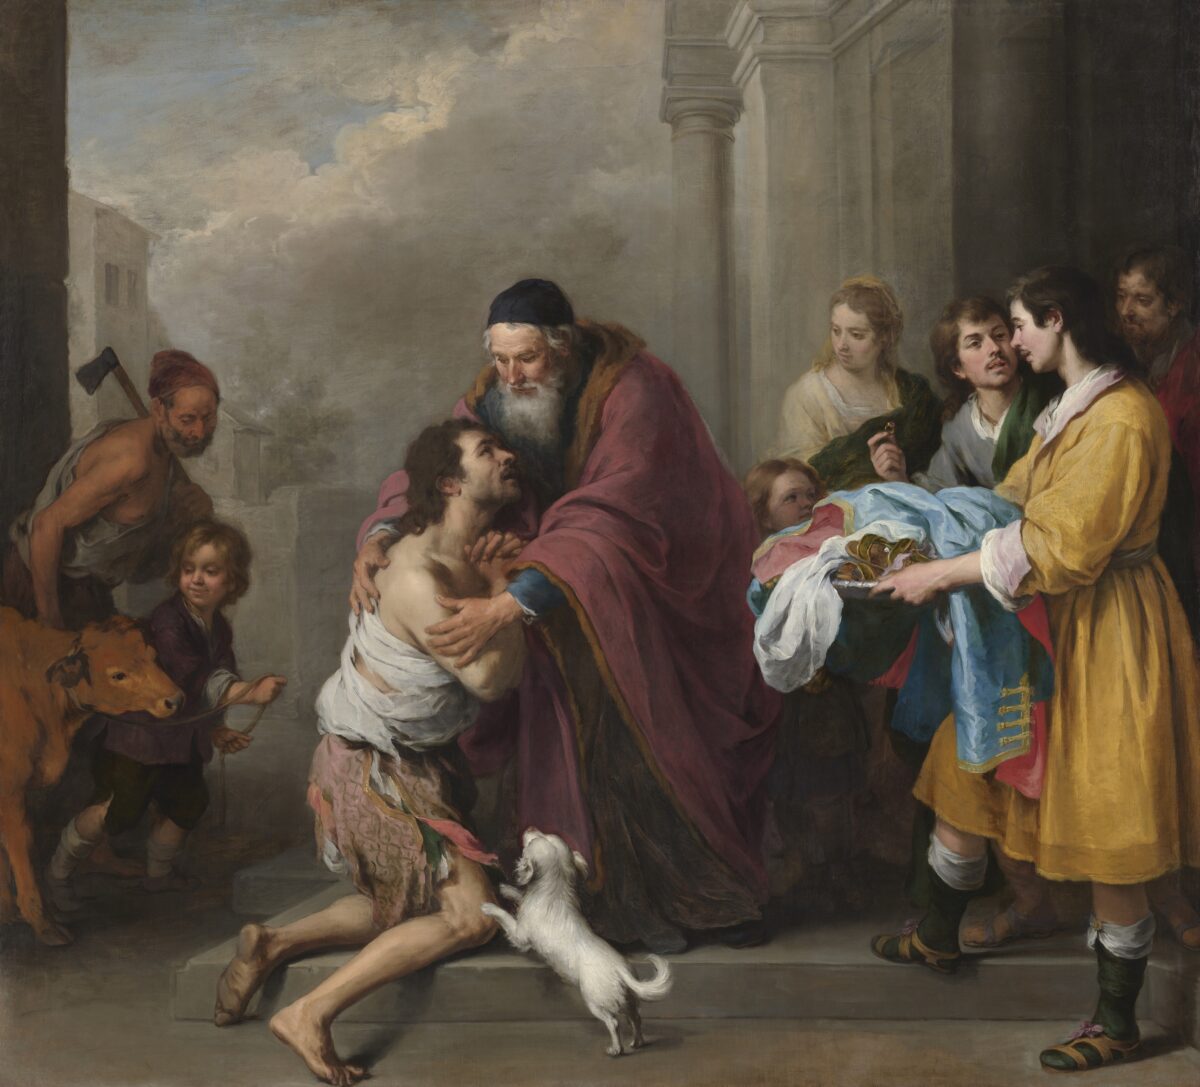 "The Return of the Prodigal Son," 1667 or 1670 by Bartolomé Esteban Murillo. Oil on canvas; 93 1/16 inches by 102 3/4 inches. Gift of the Avalon Foundation, National Gallery of Art, Washington, DC. (Courtesy of National Gallery of Art, Washington)